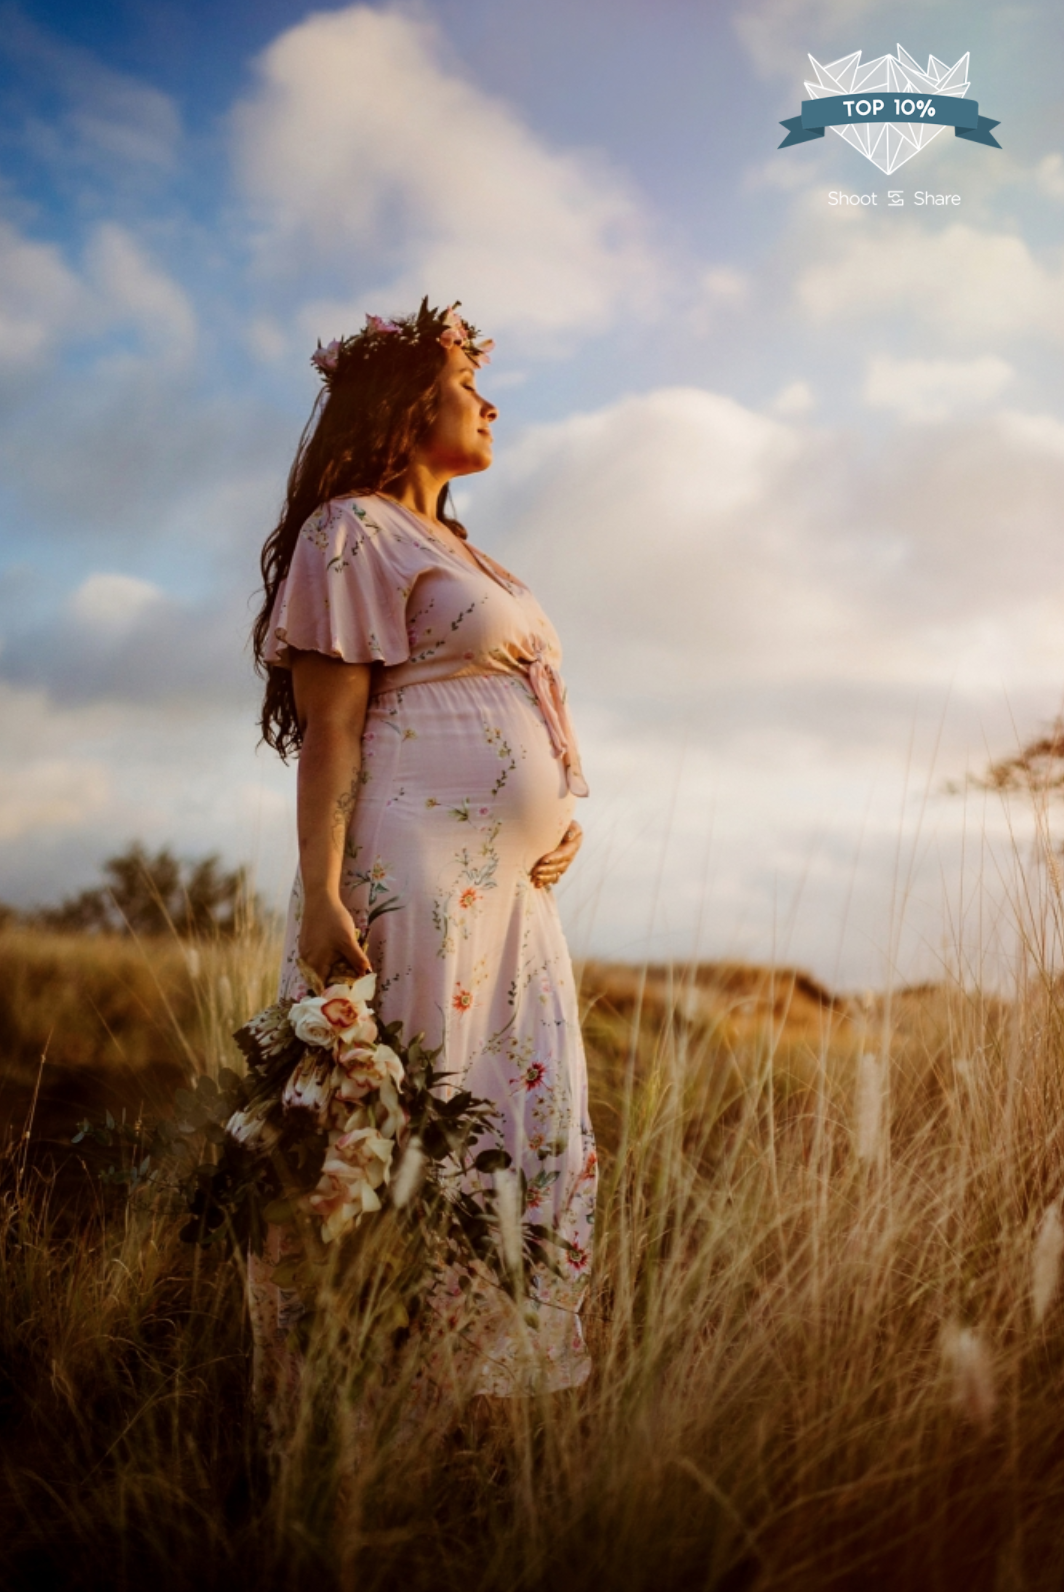 Shoot-Share-Contest-2018-Hawaii-Top-10-Maternity-photographer.png